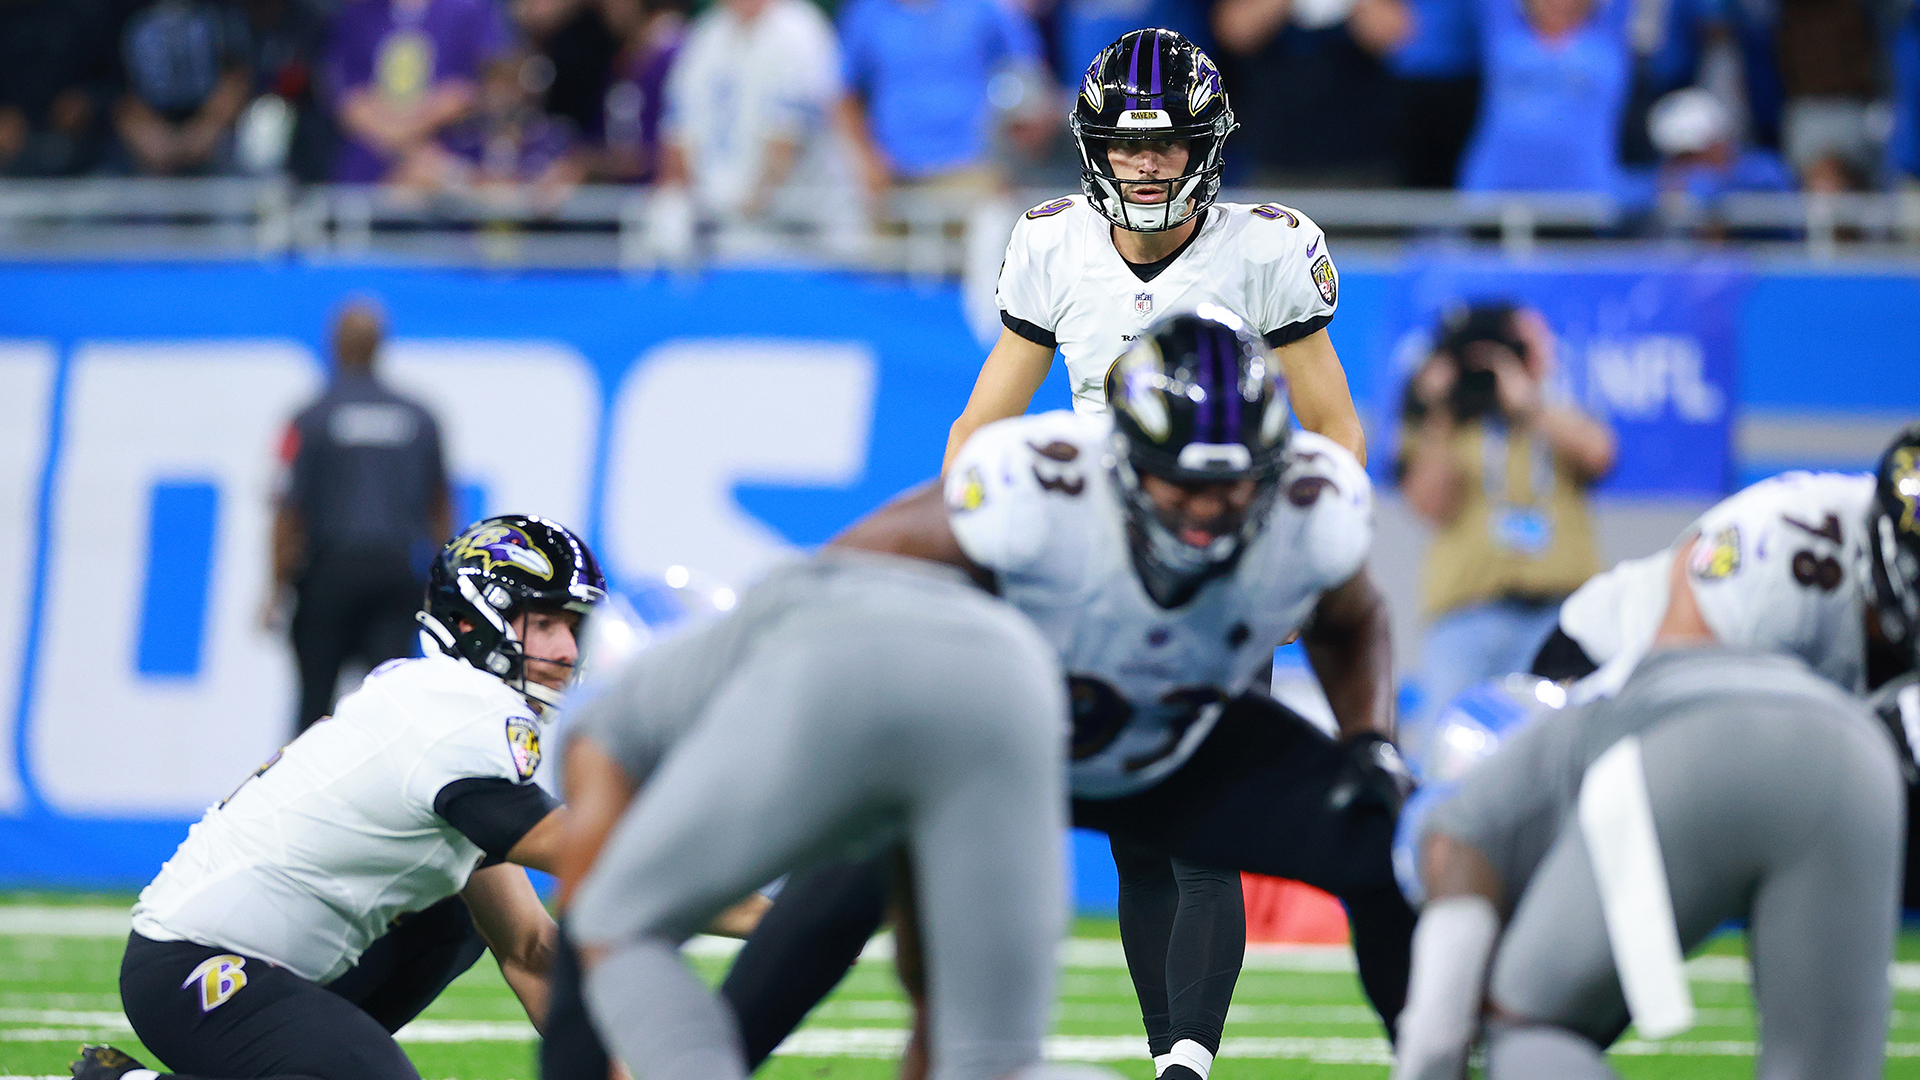 Tuckers NFLrecord FG lifts Ravens to 1917 win over Lions  KARK